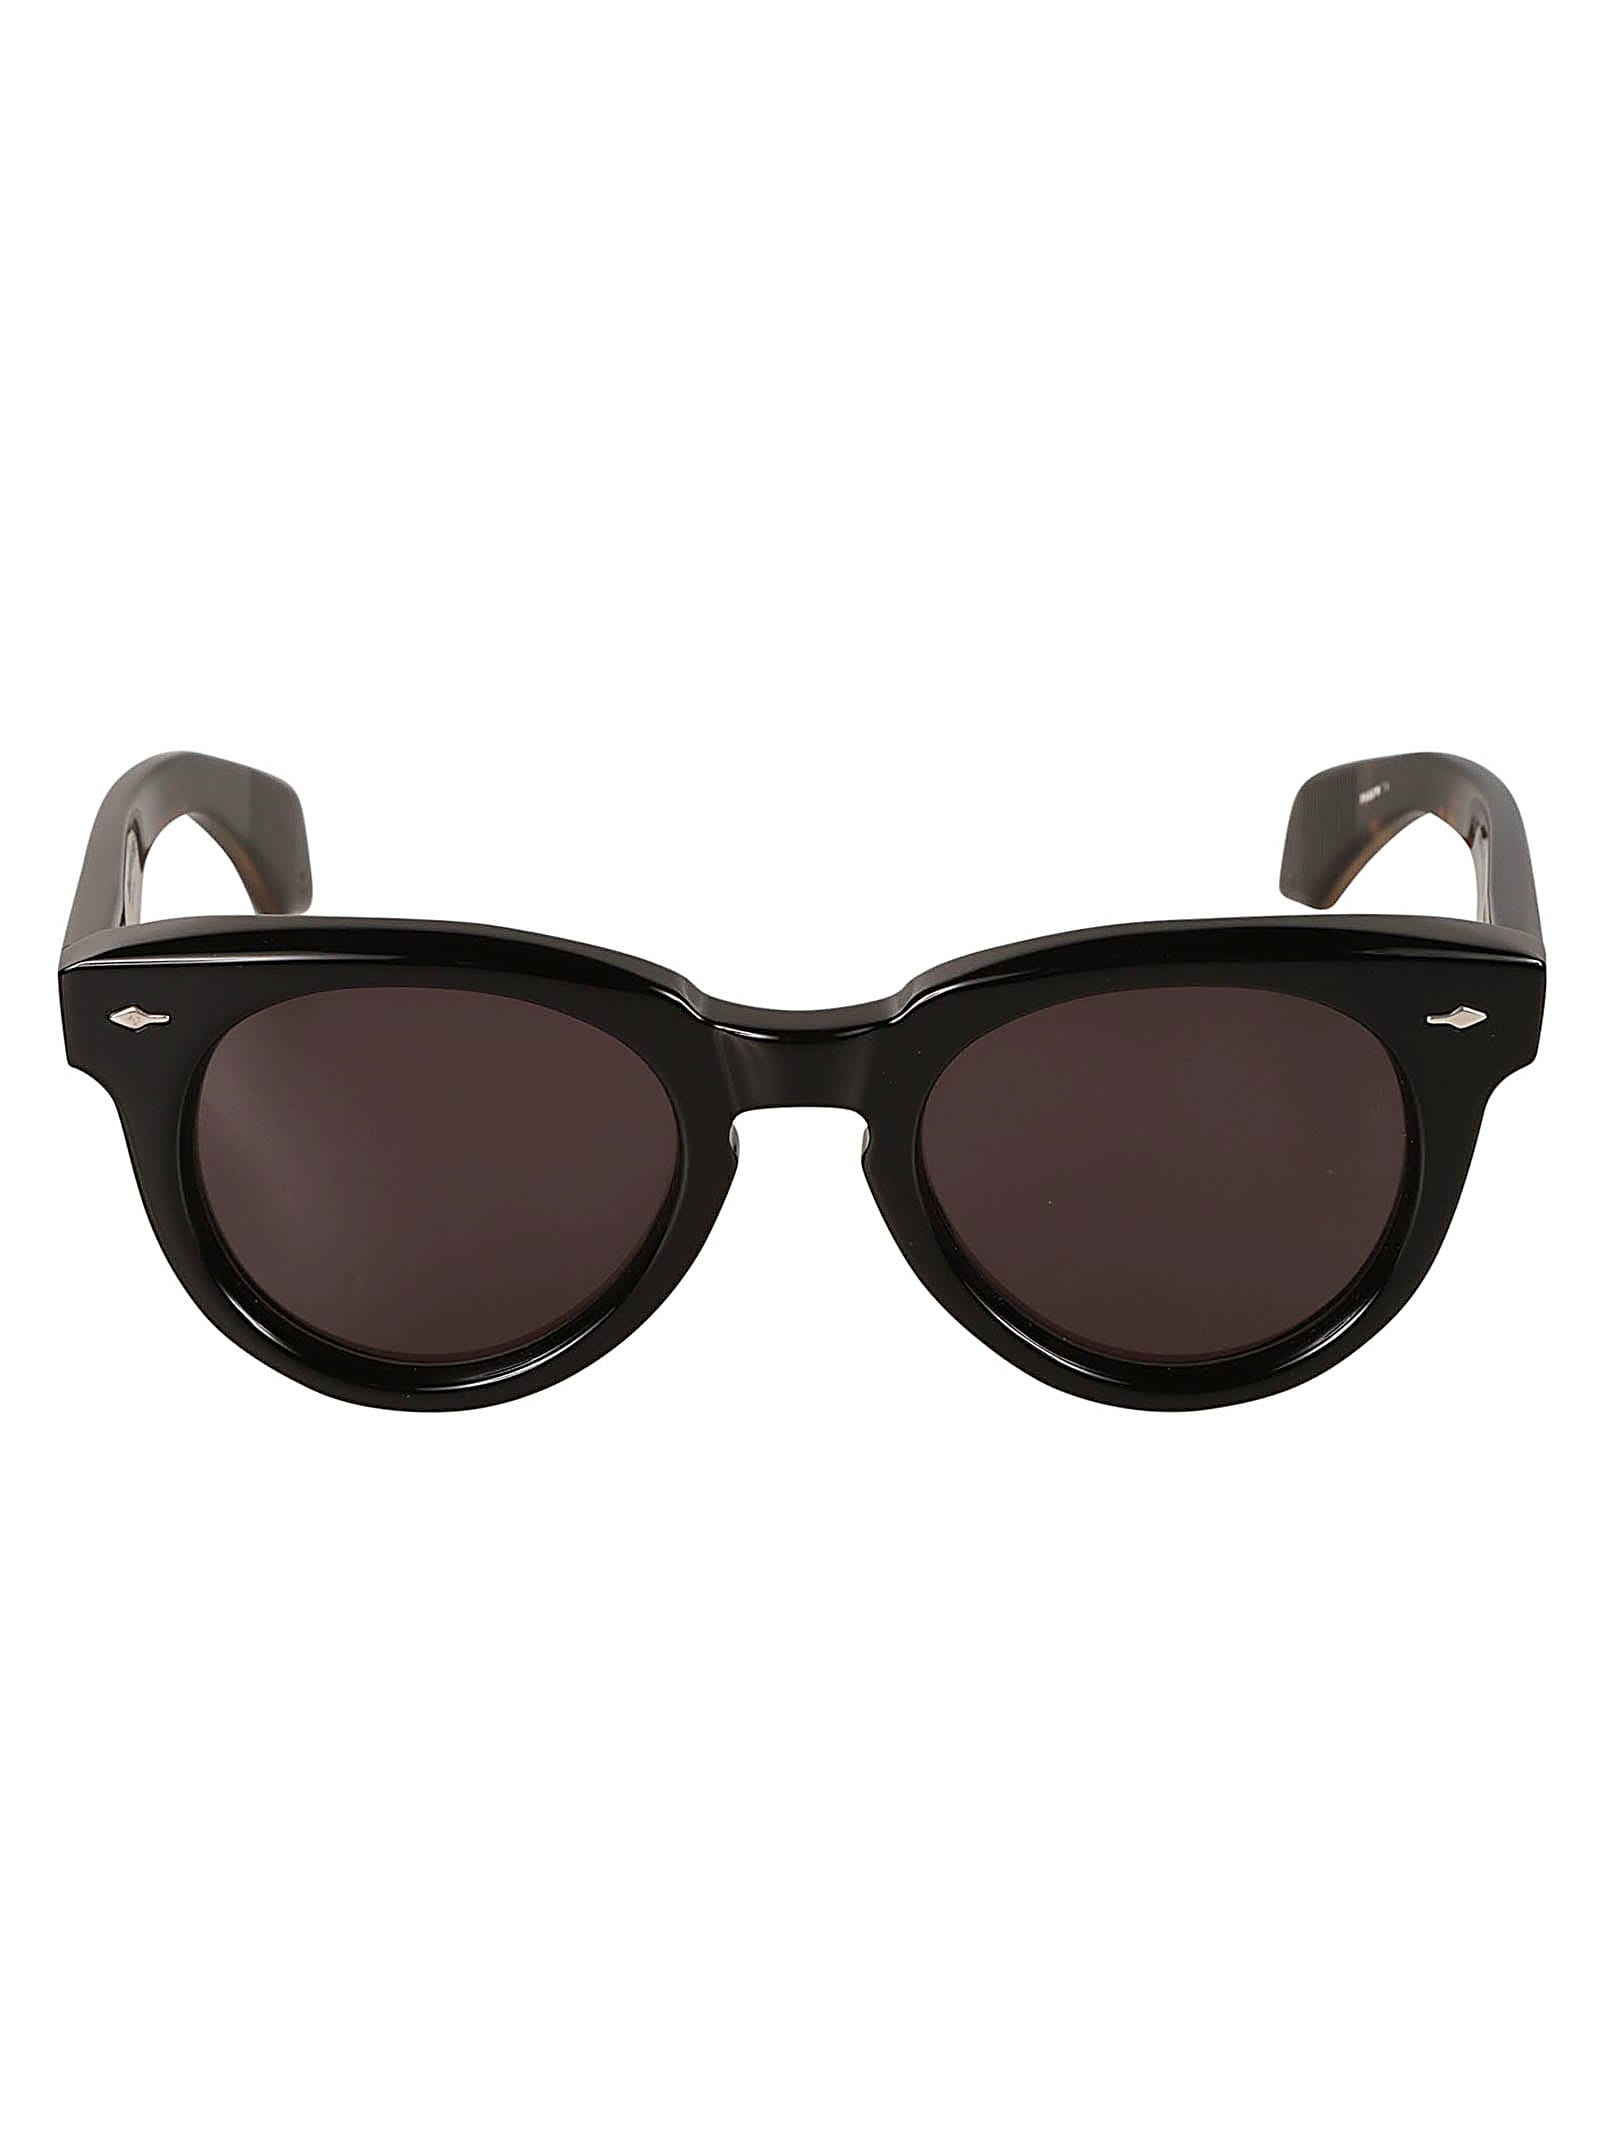 Jacques Marie Mage Fontaine Sunglasses Sunglasses In Black